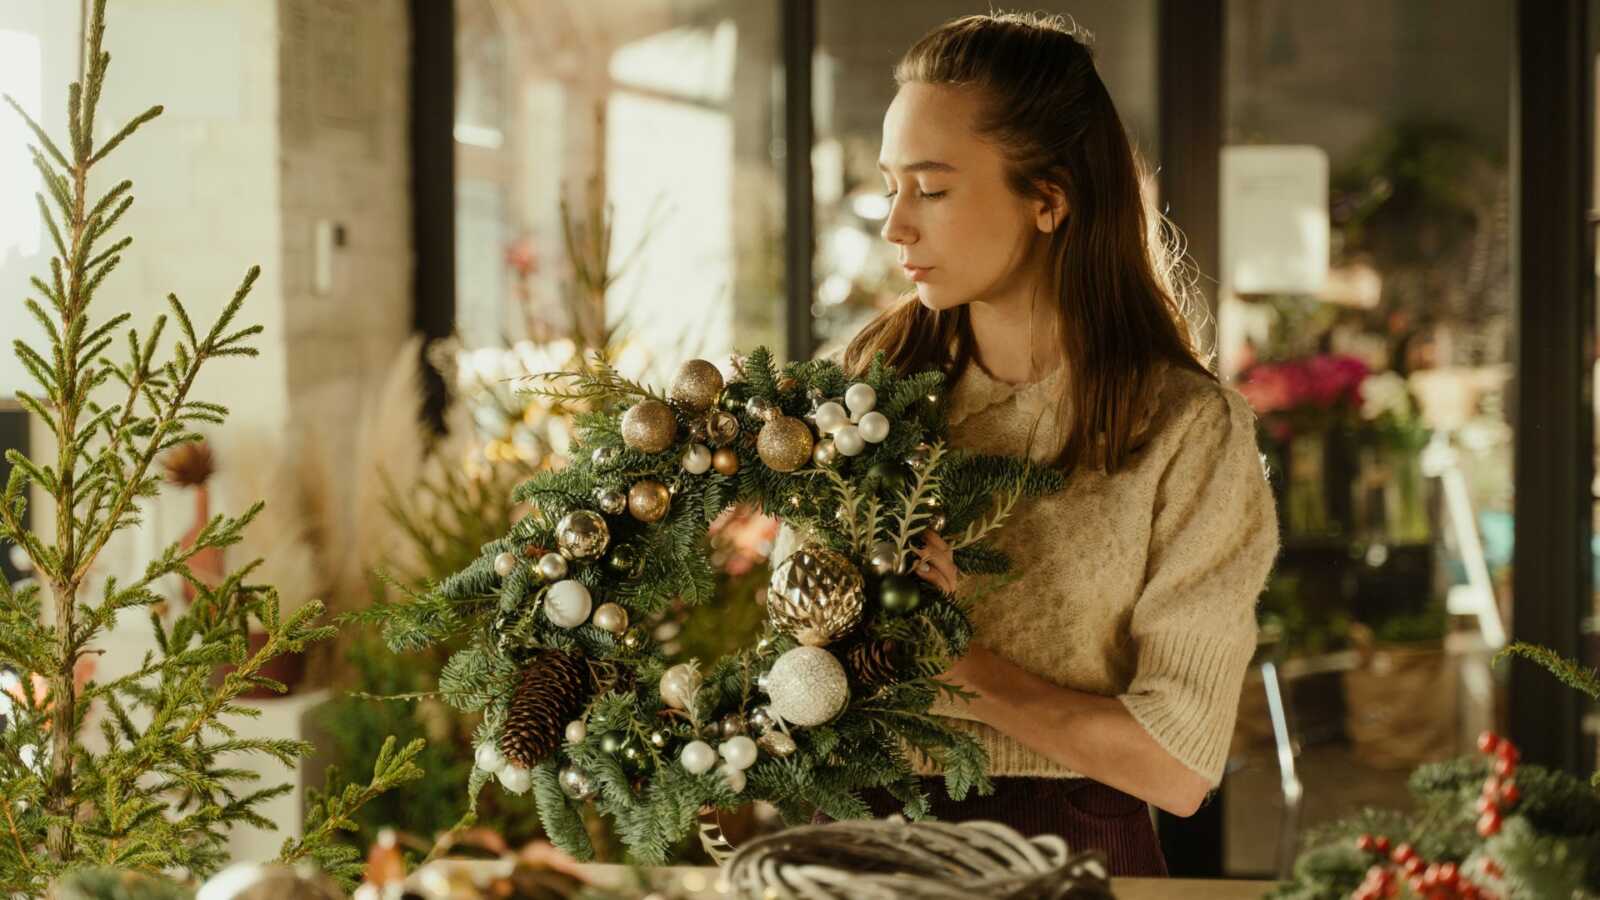 Woman in brown sweating holding Christmas wreath